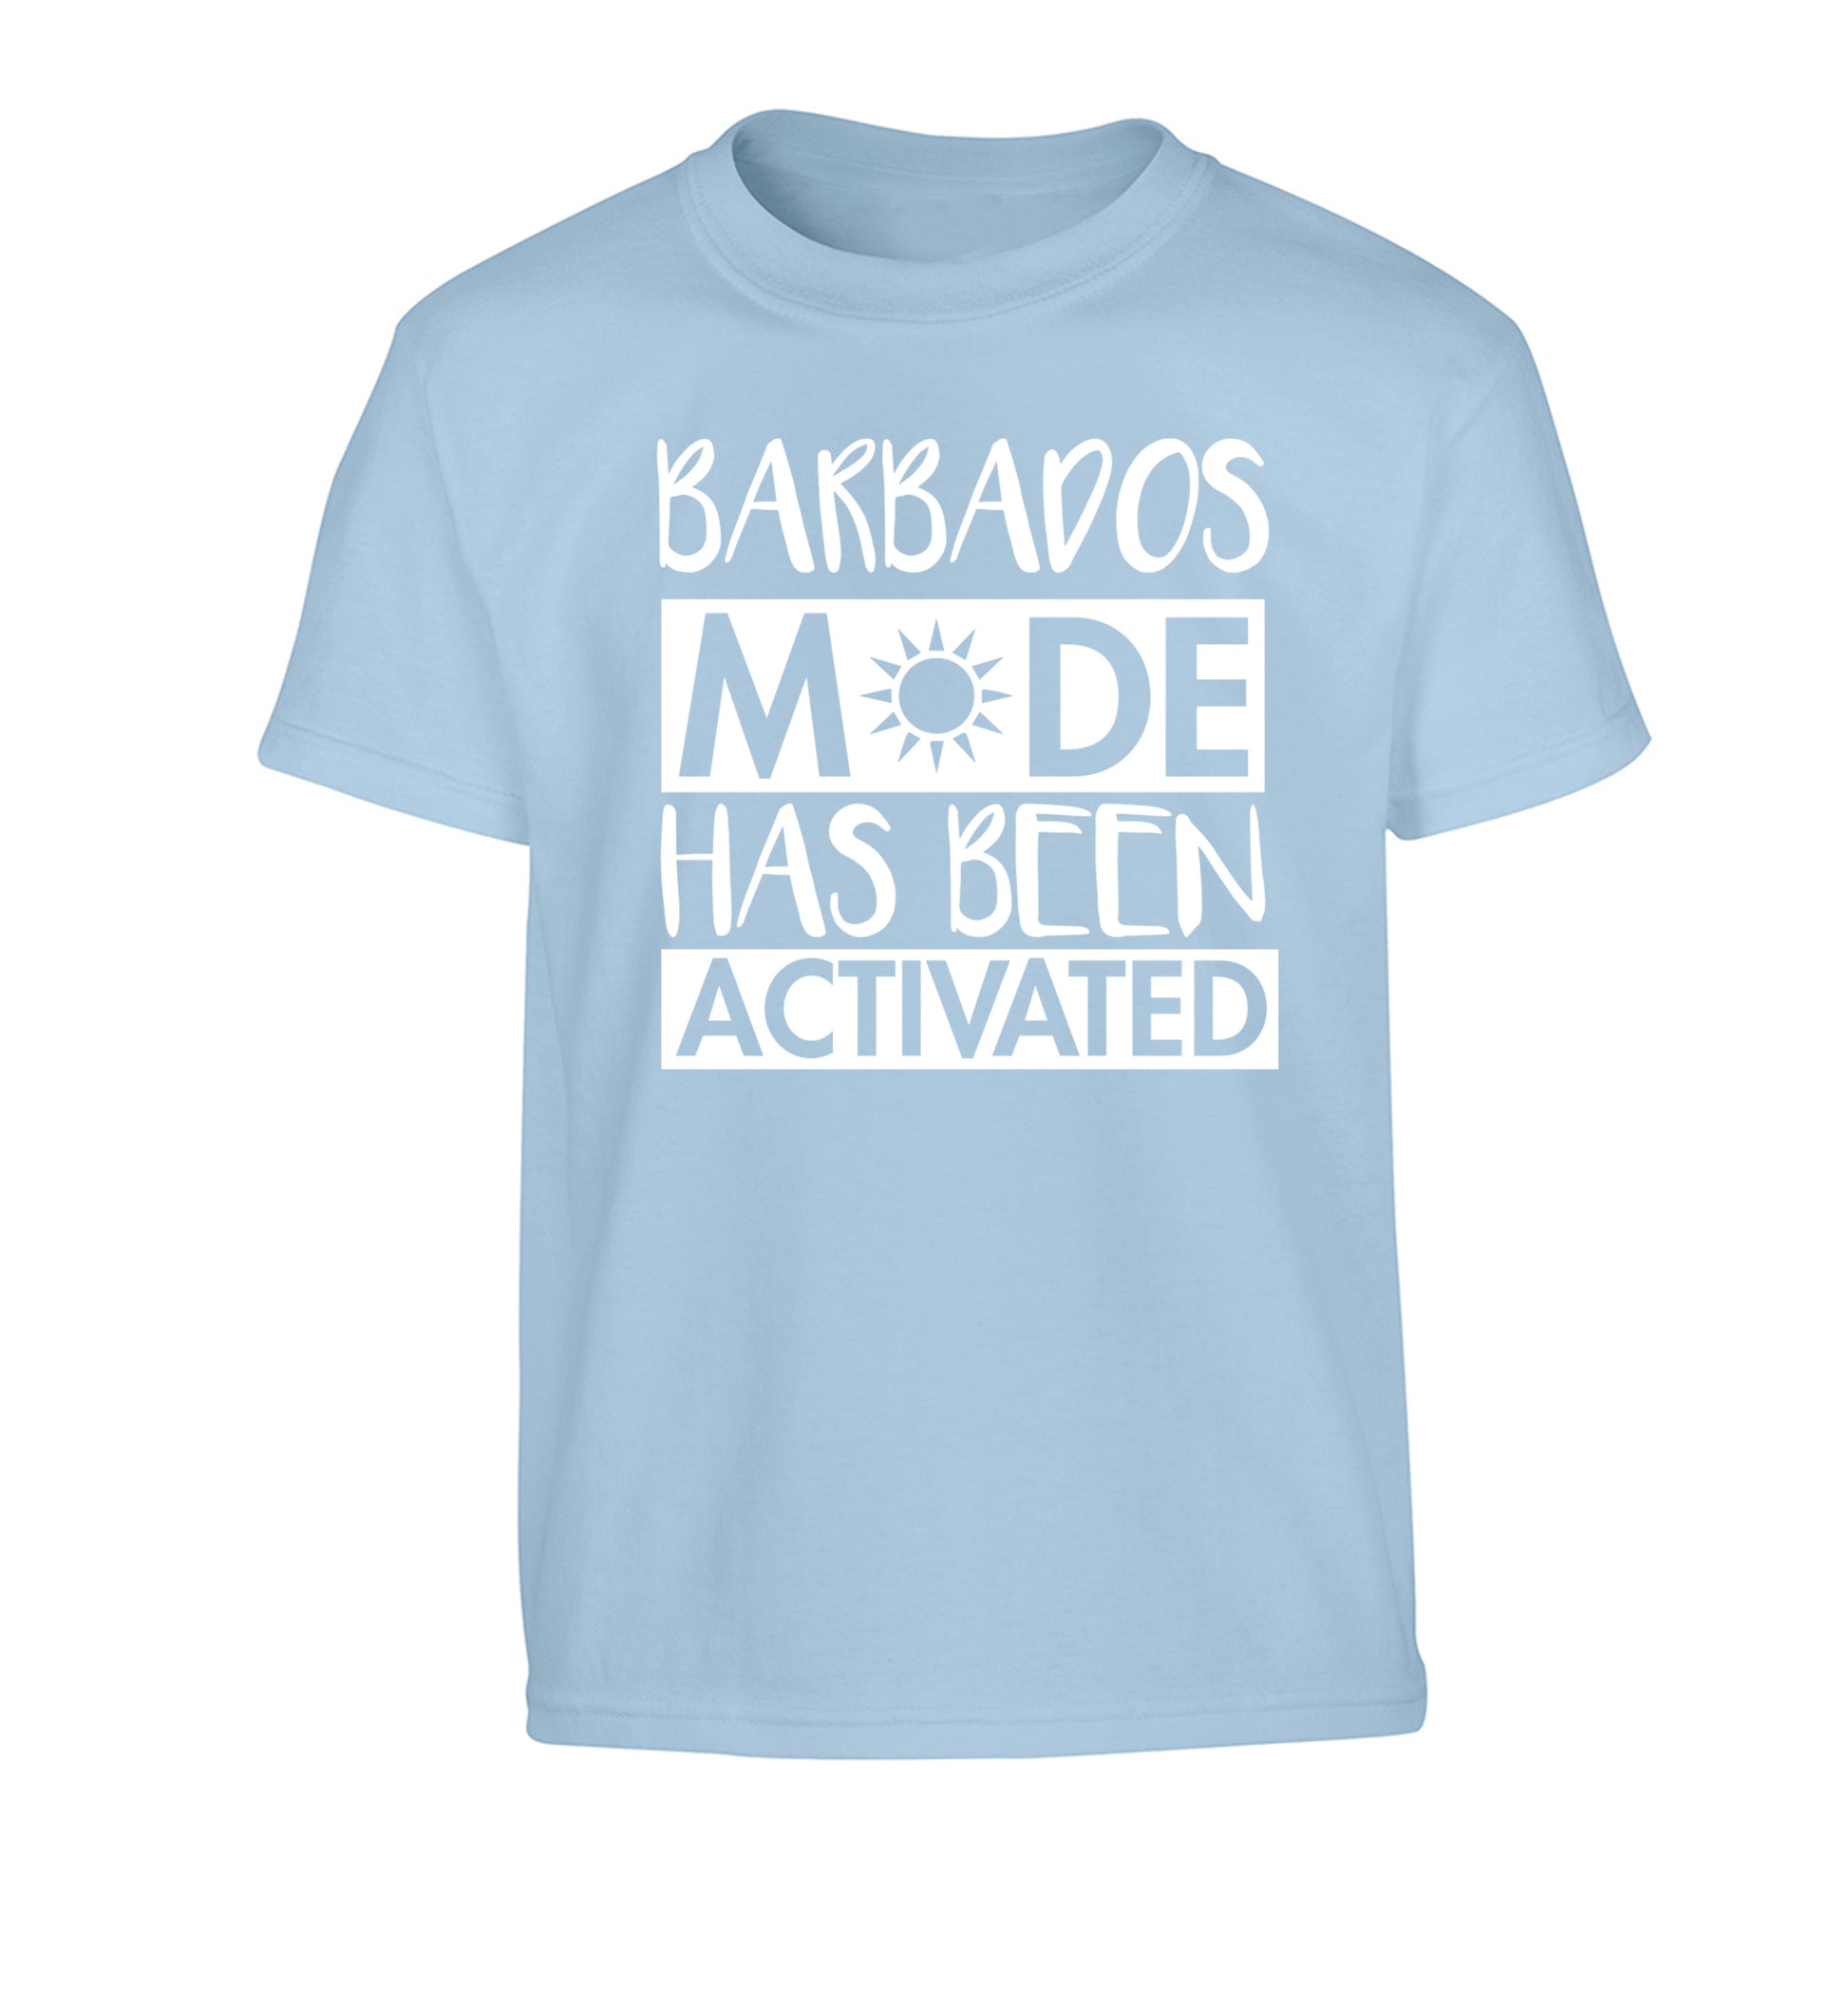 Barbados mode has been activated Children's light blue Tshirt 12-13 Years